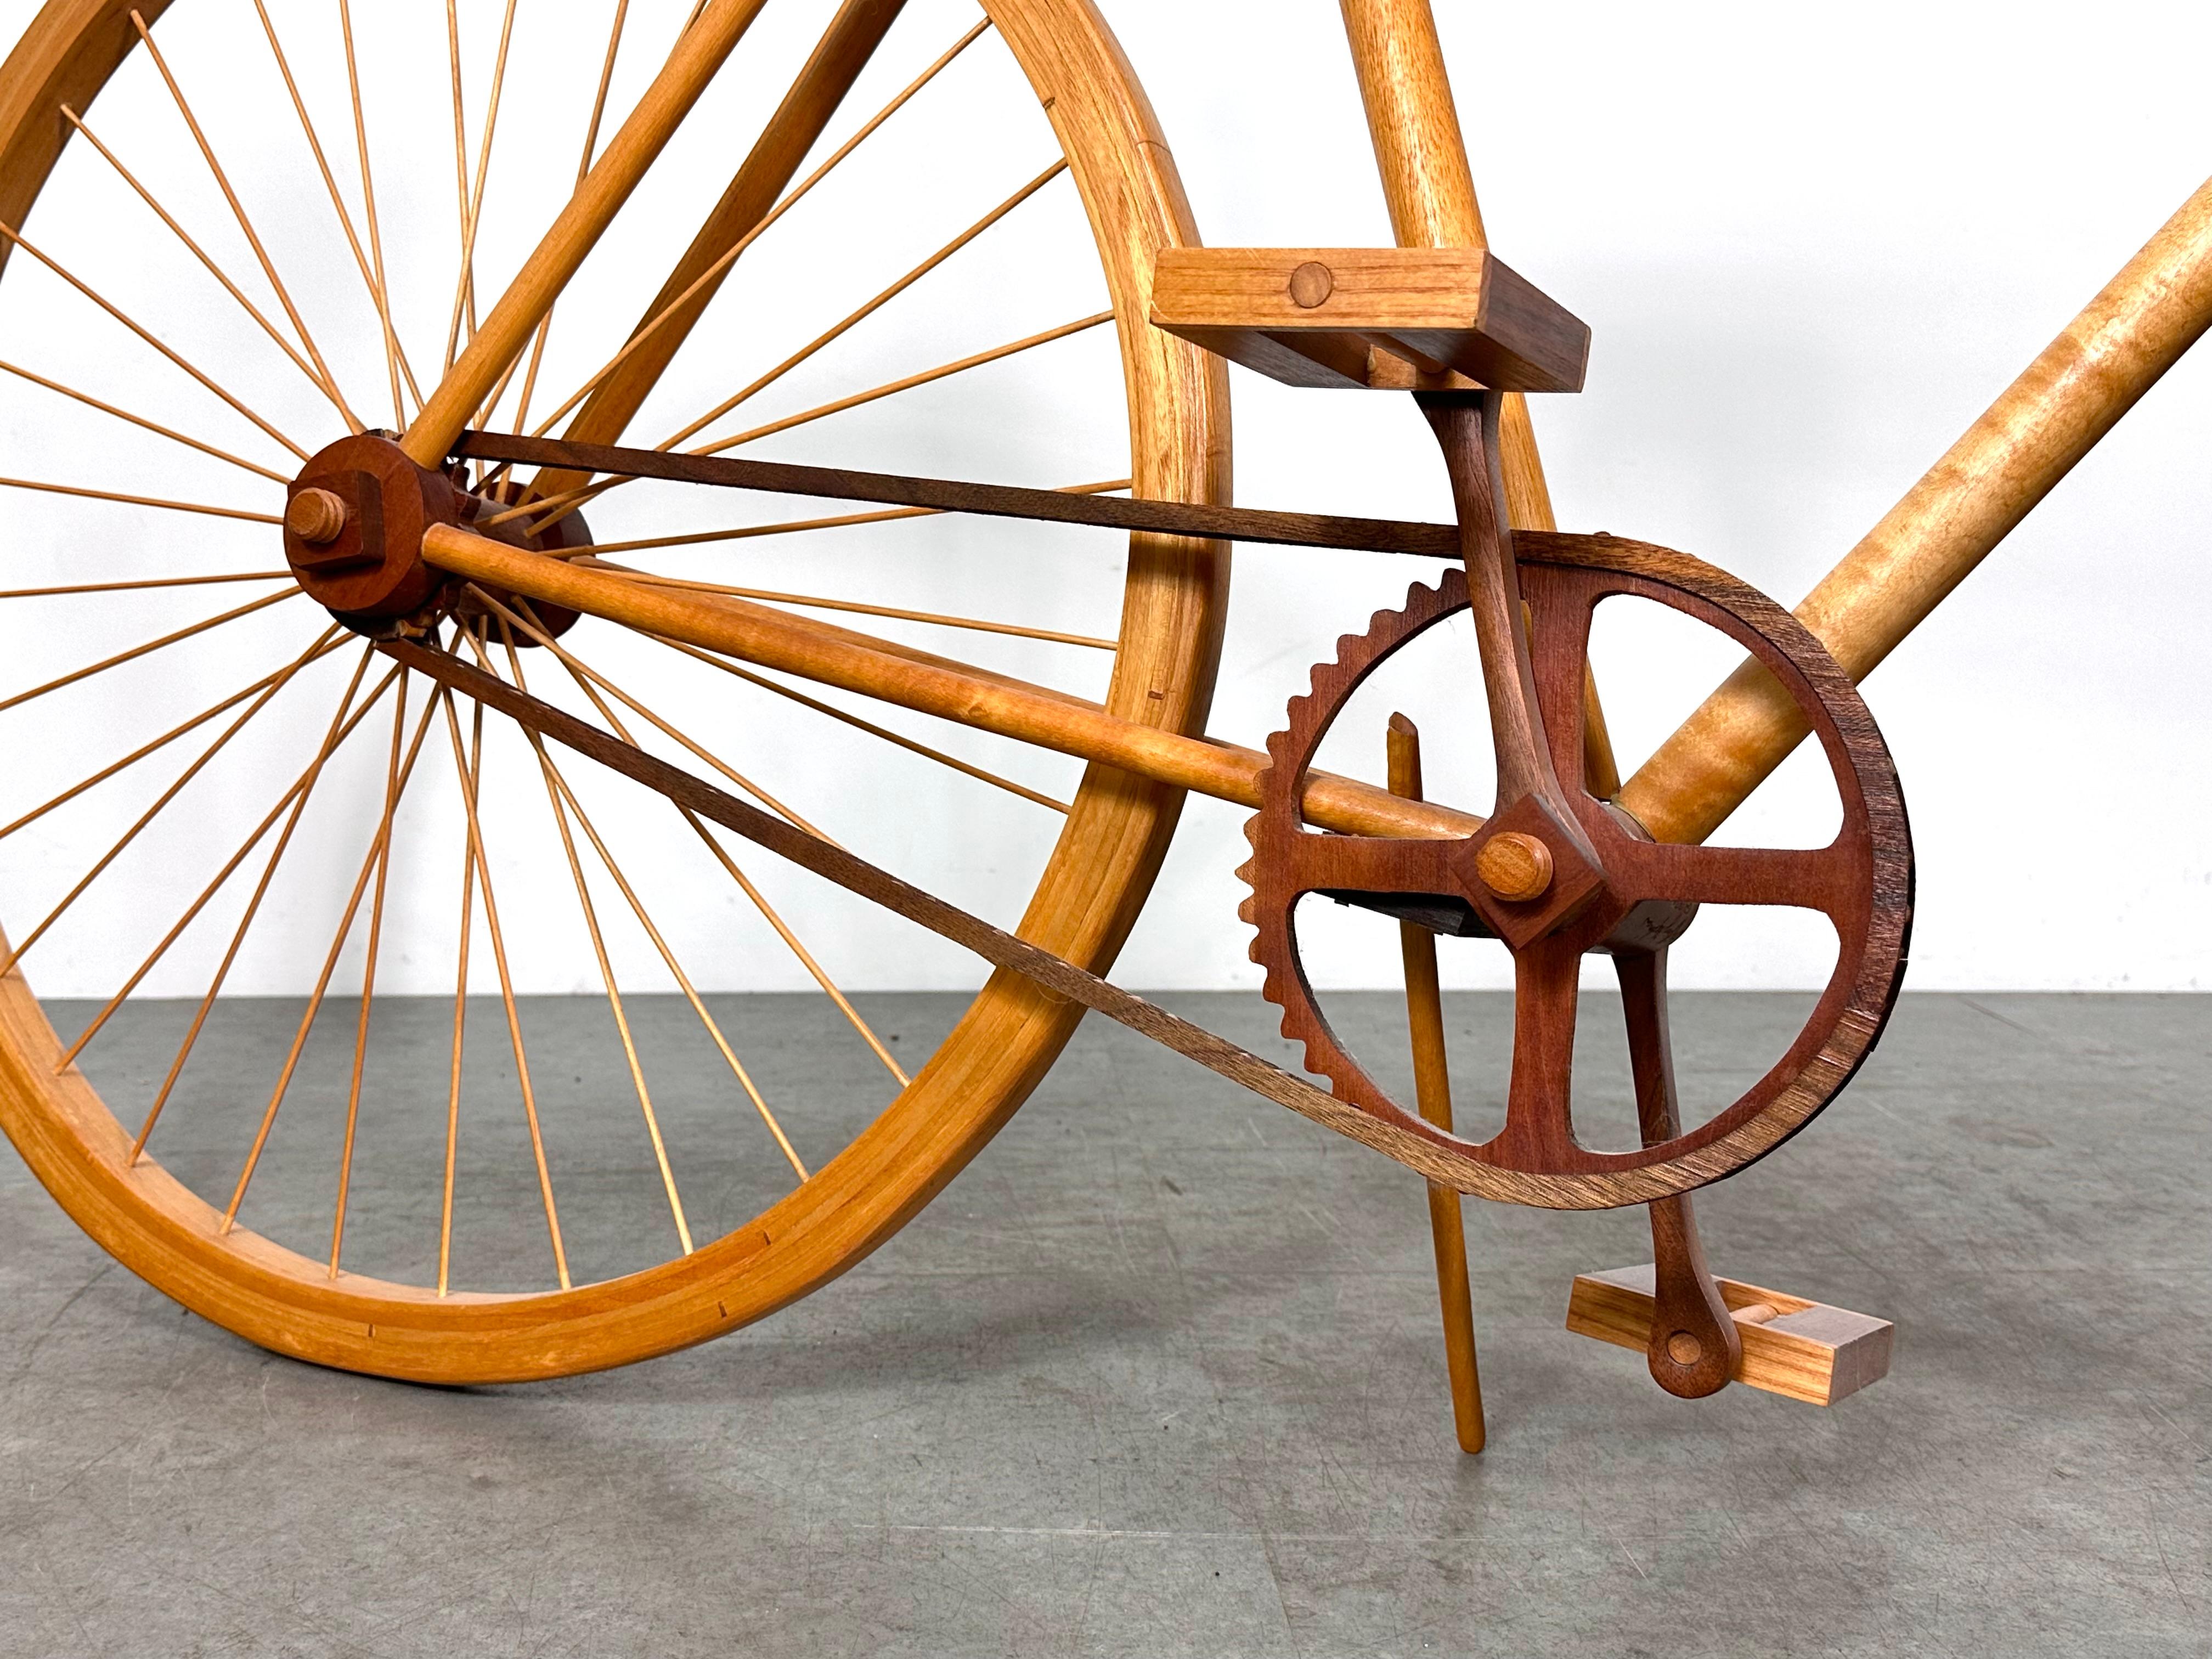 20th Century American Studio Craft Life Size Wooden Bicycle Sculpture Artist Signed 1988 For Sale